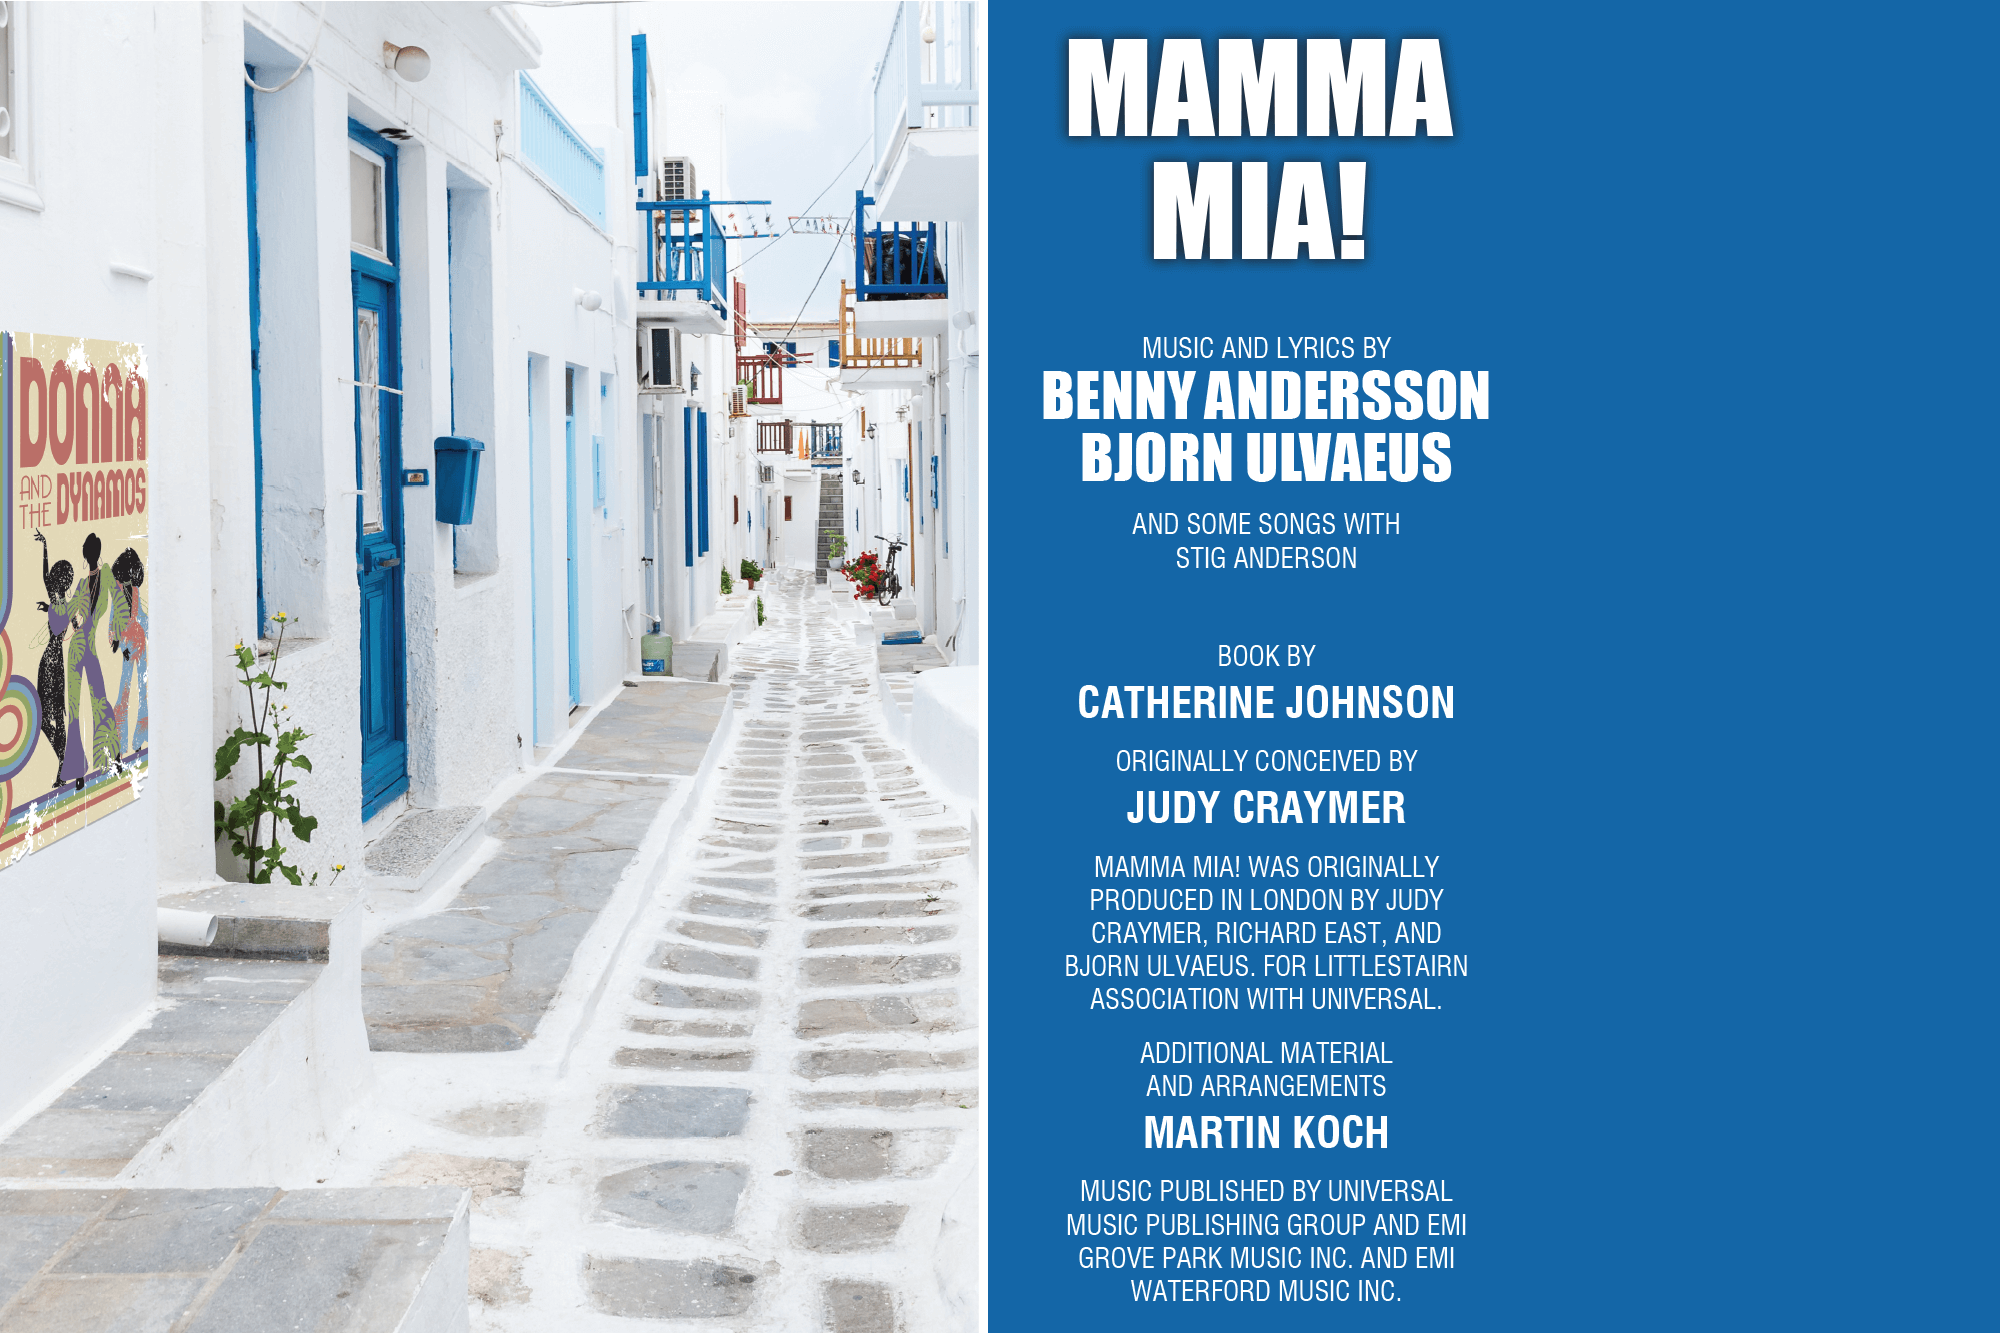 Image for the play "Mamma Mia!"